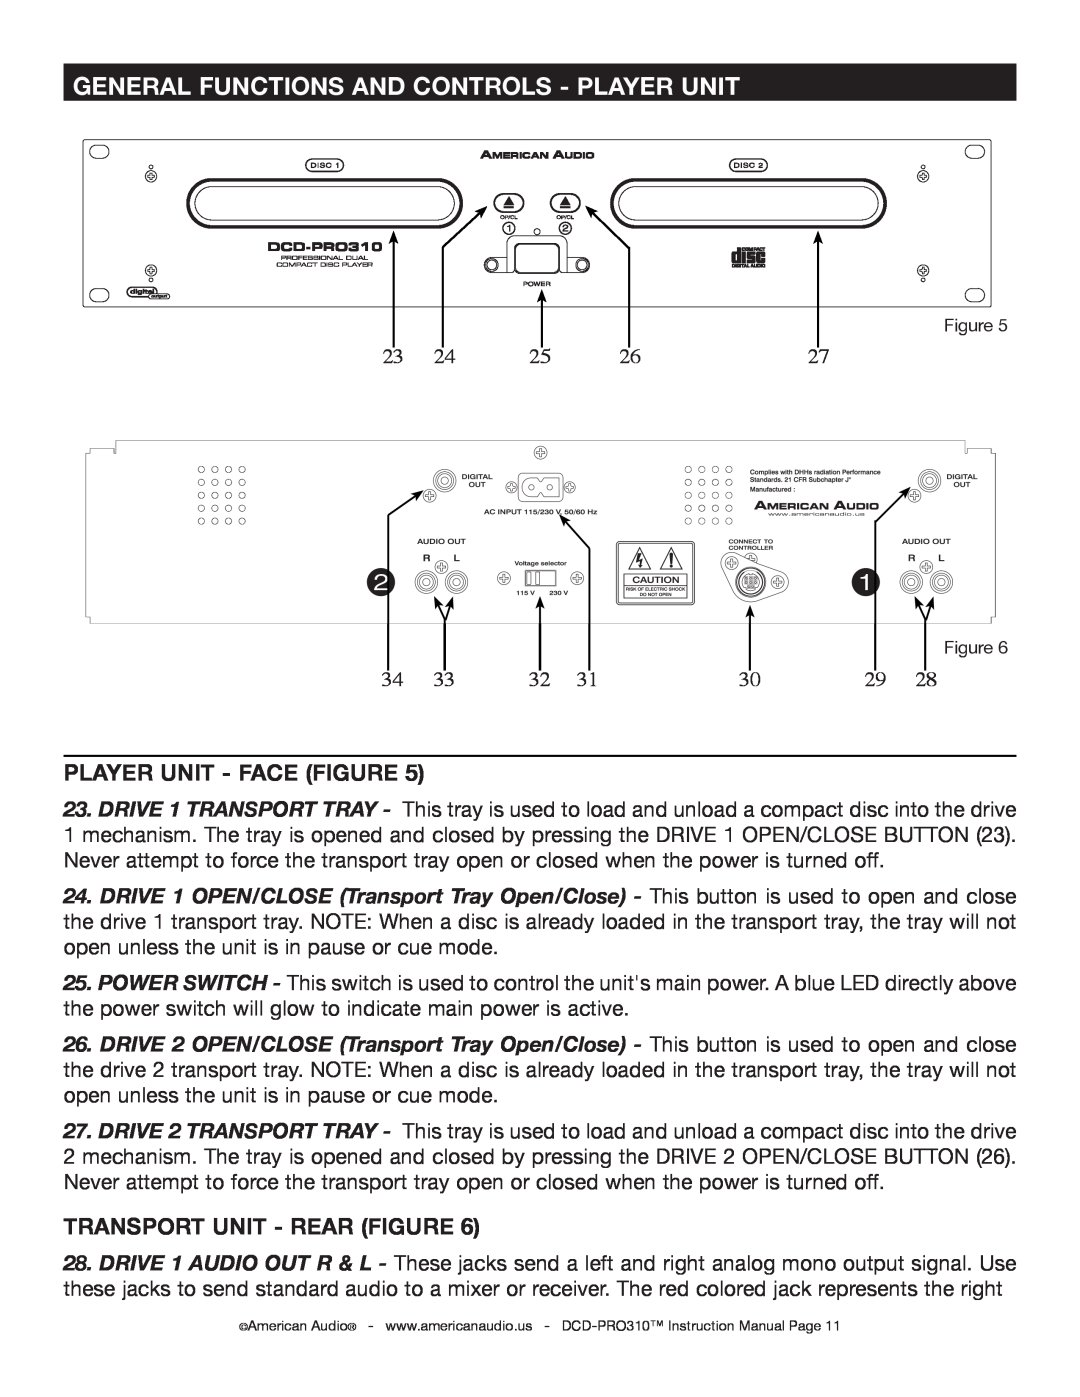 American Audio DCD-PRO310 operating instructions General Functions And Controls - Player Unit, Player Unit - Face Figure 